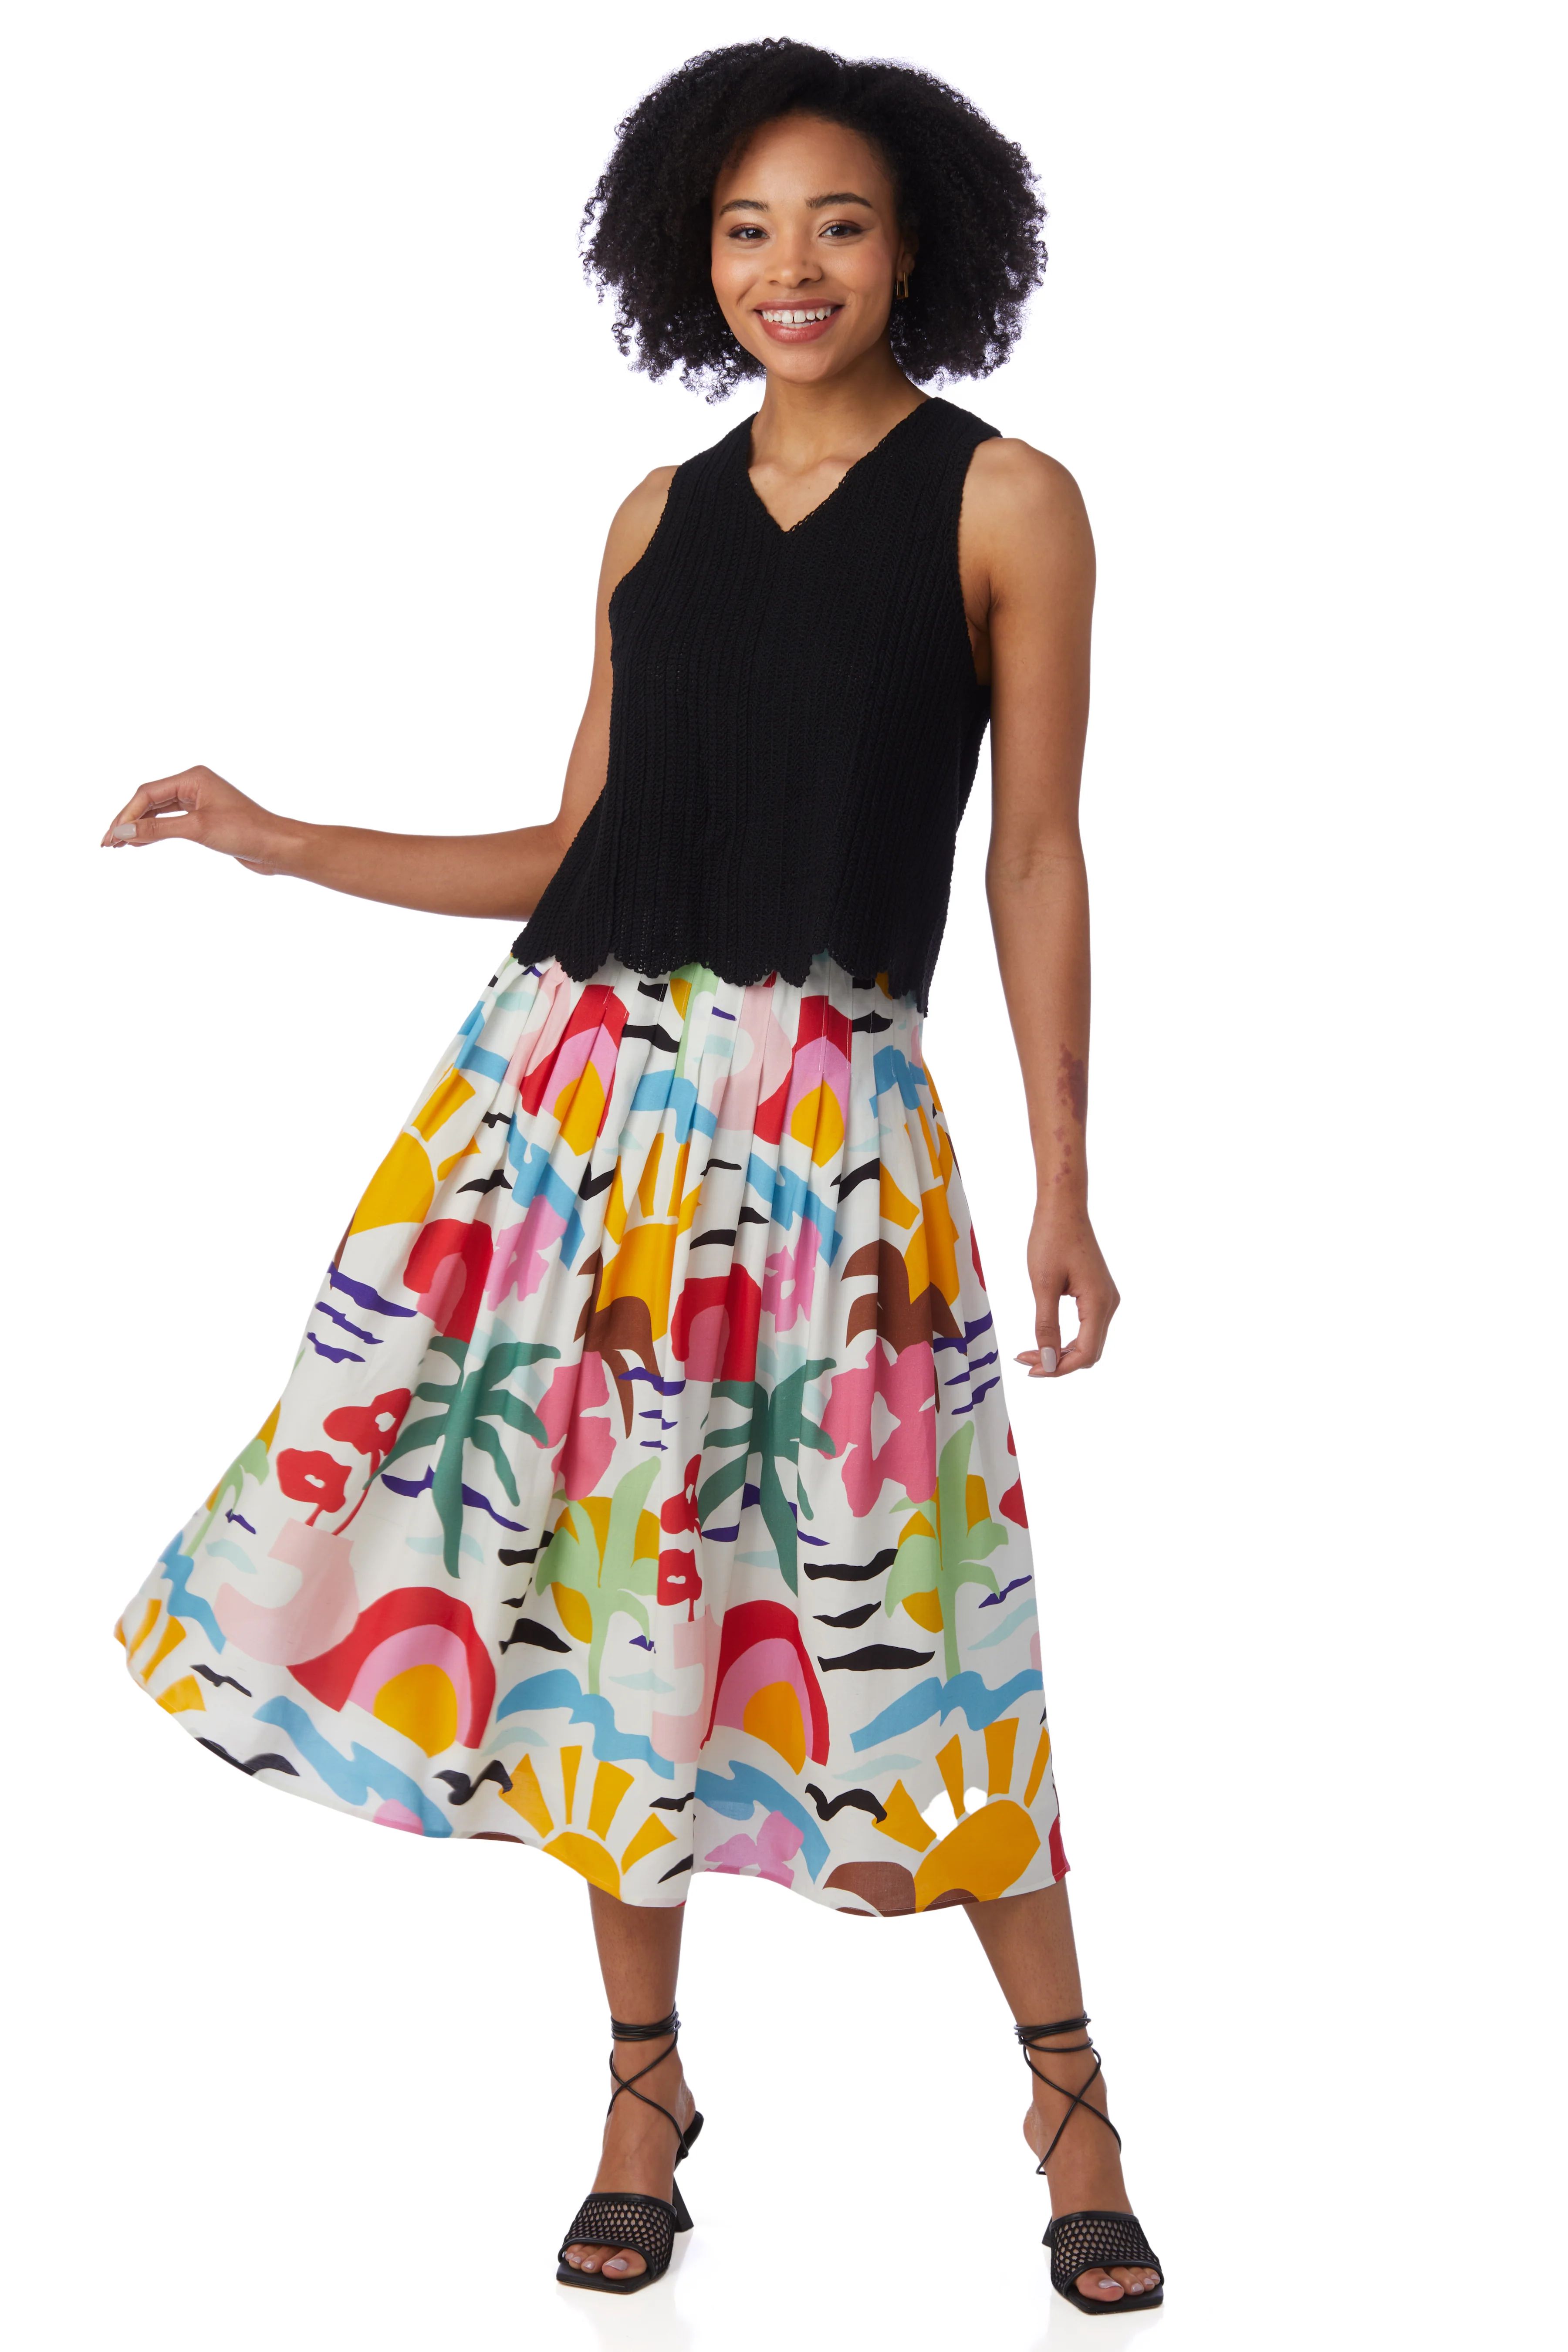 Mallie Skirt in Yamas | CROSBY by Mollie Burch | CROSBY by Mollie Burch